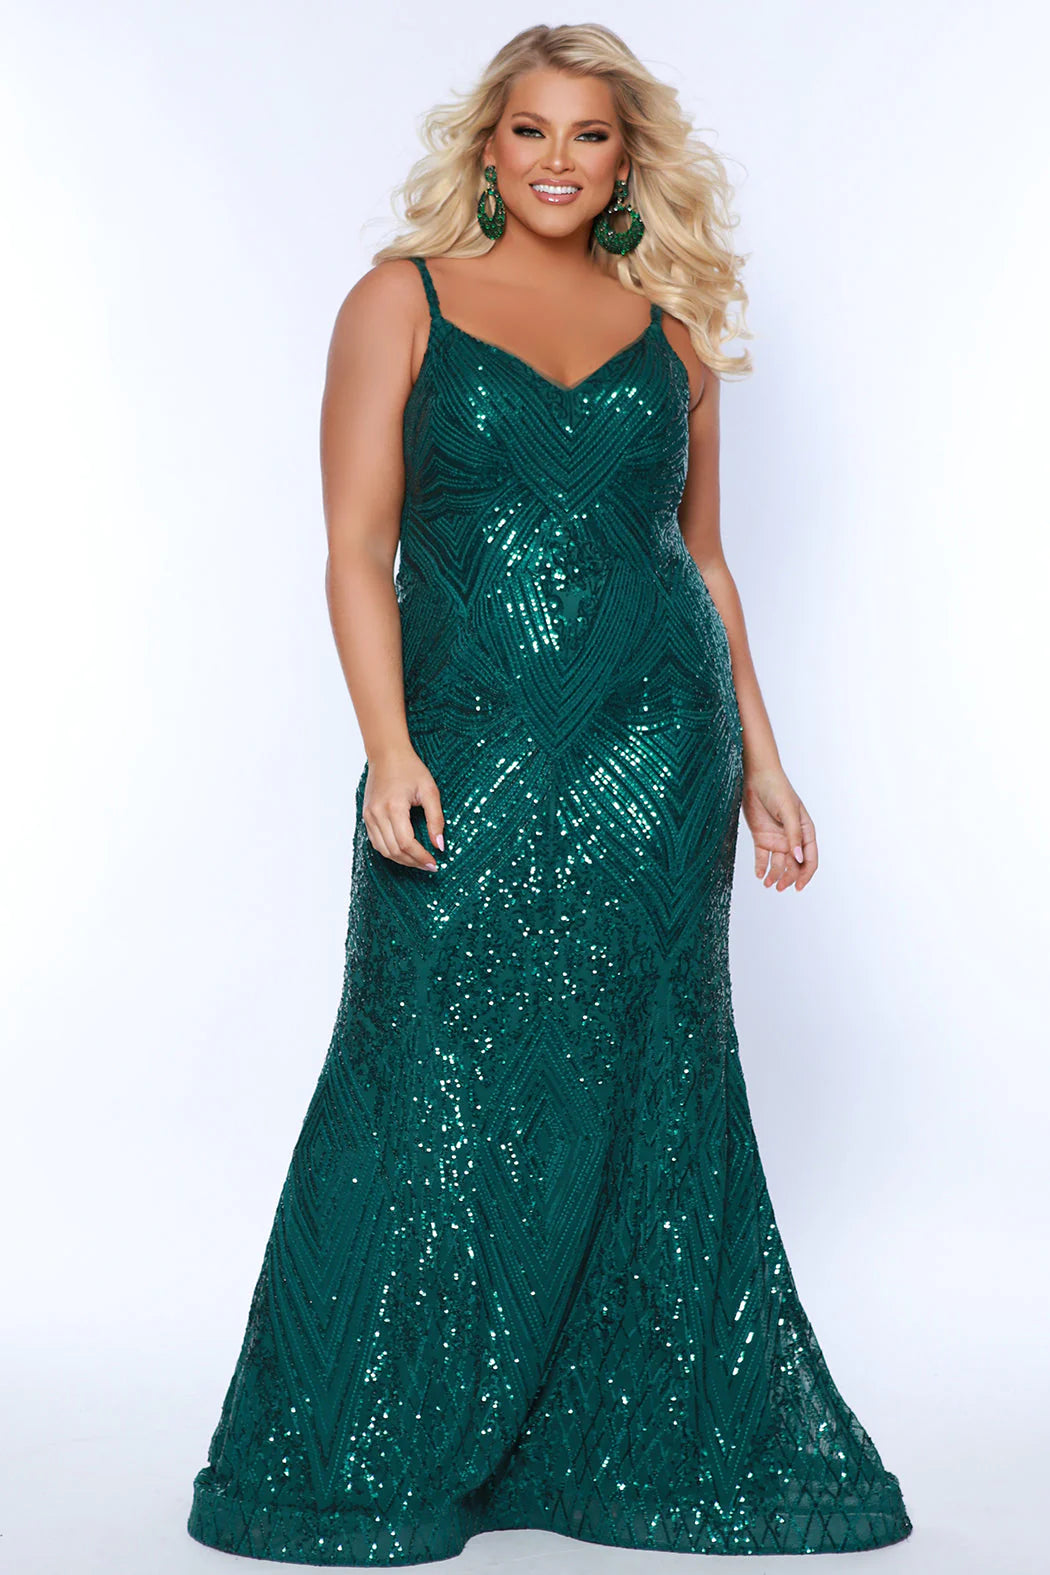 Sydney's Closet SC7340 Rose Gold Fitted Evening Gown Sequins V Neckline Plus Size Prom Dress. Look dazzling like a diva in Sydney's Closet SC7340 Rose Gold Fitted Evening Gown. Its sequined V-neckline, fitted silhouette, and plus size design will make you shine like a star at your prom! All eyes will be on you. Oooh la la!